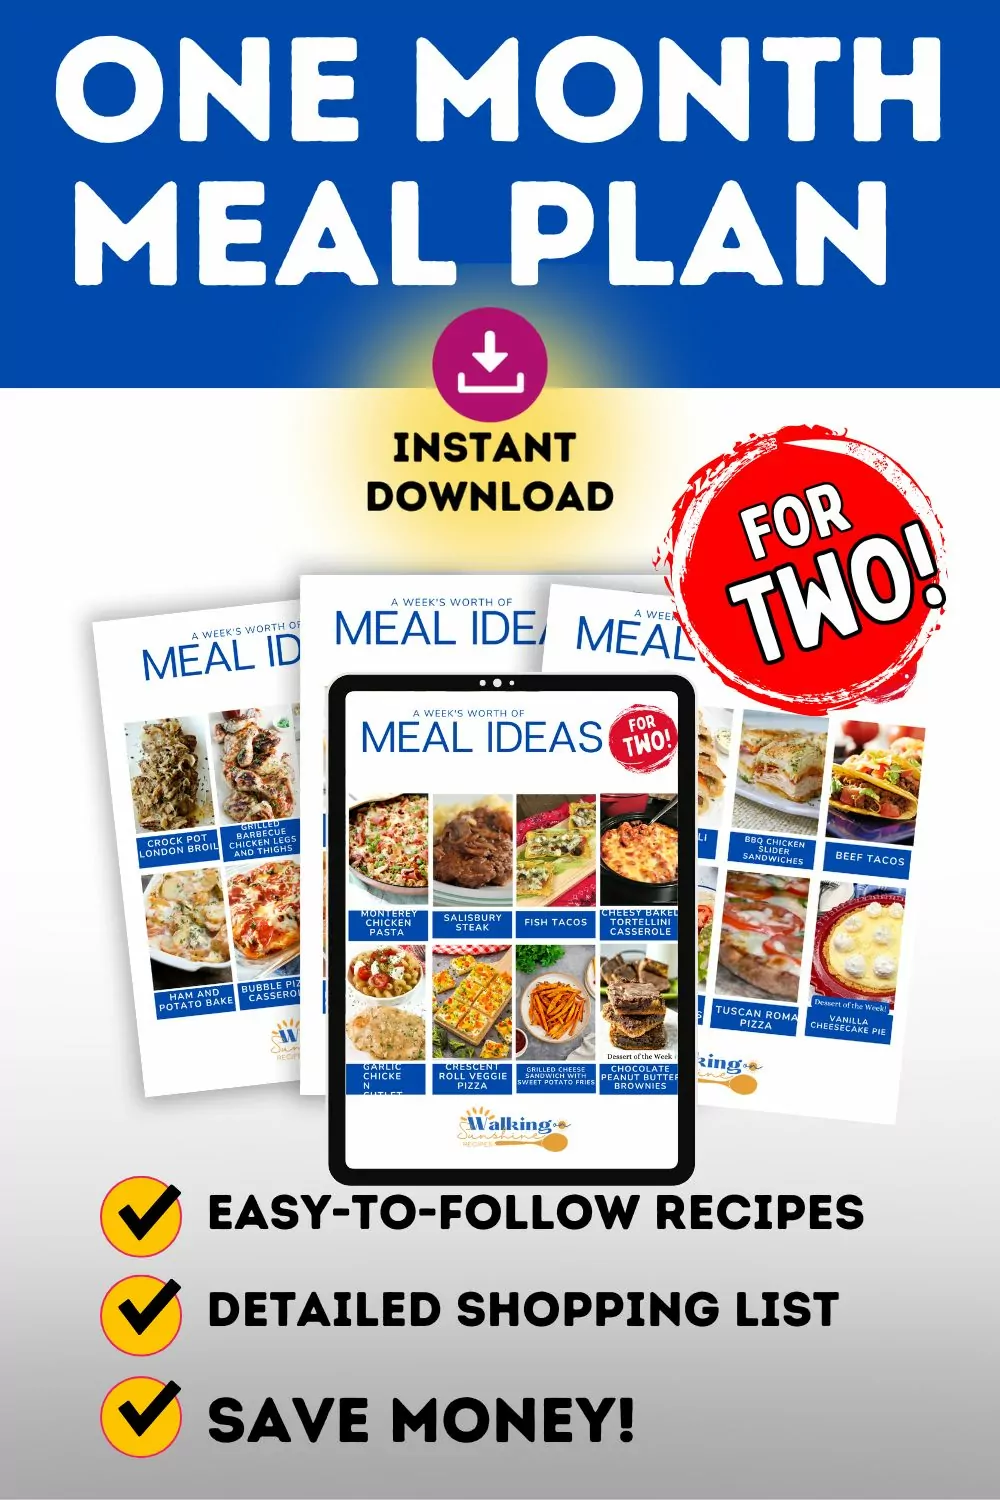 Promo image for a time-saving, budget-friendly meal plan for two people, covering an entire month.